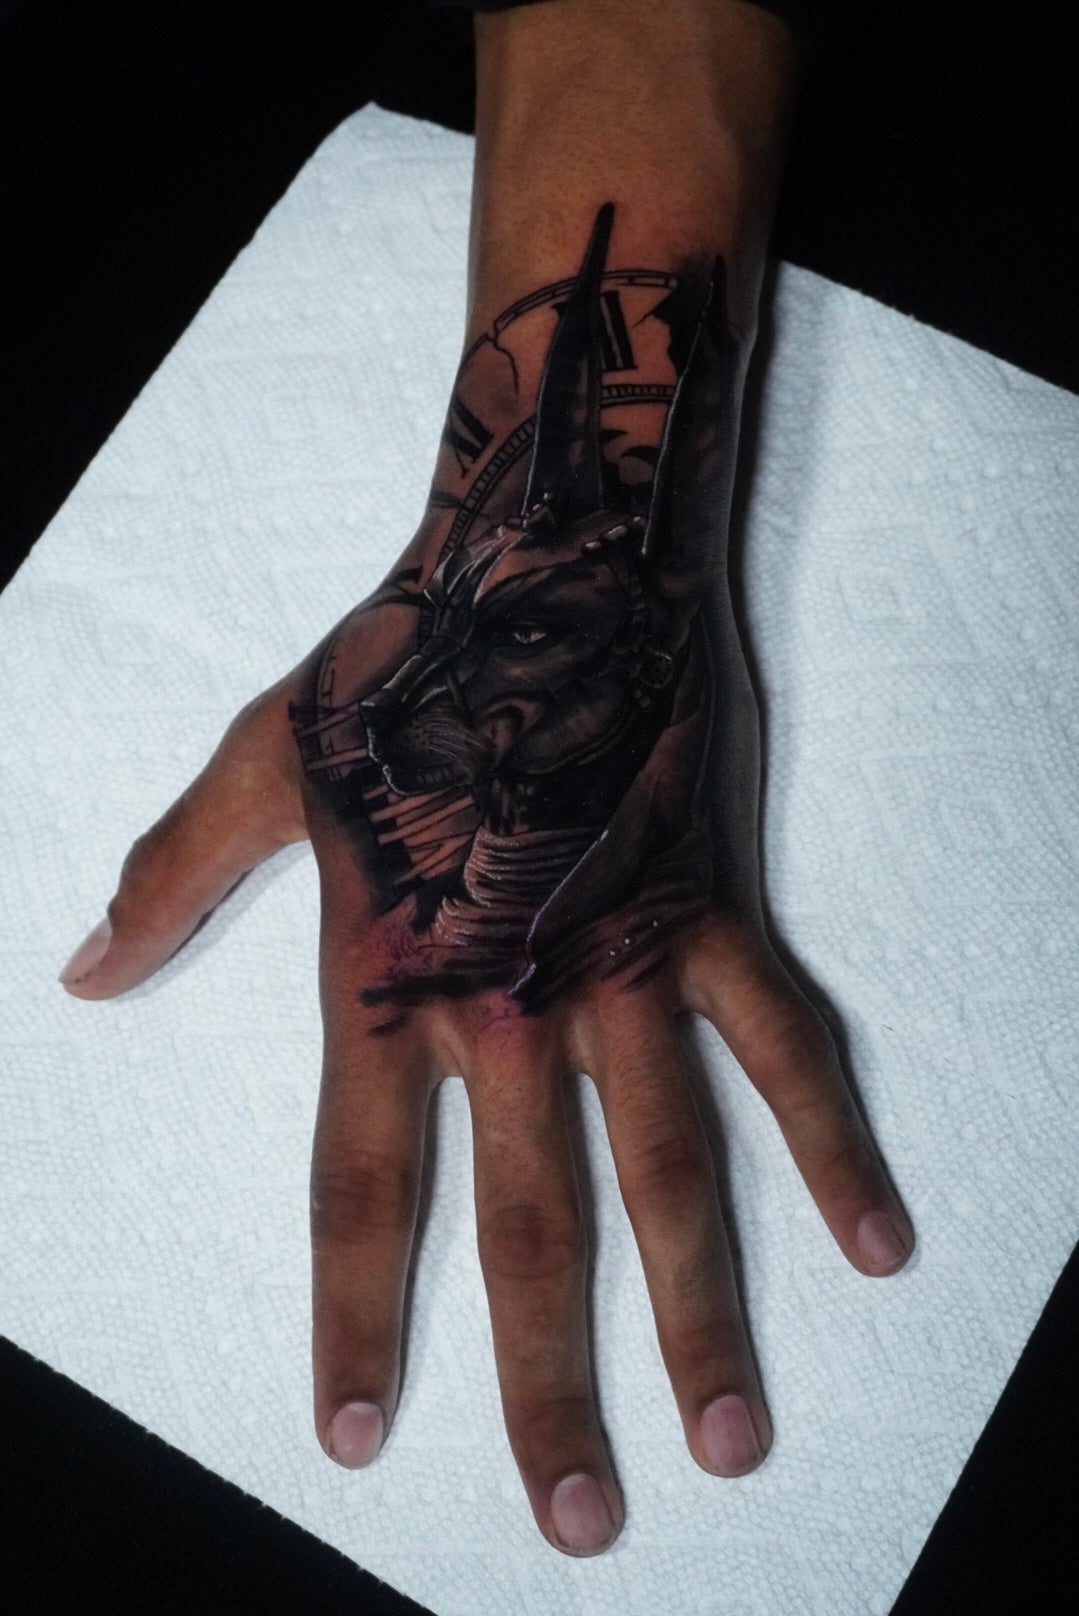 Load video: Spicy hand tattoo